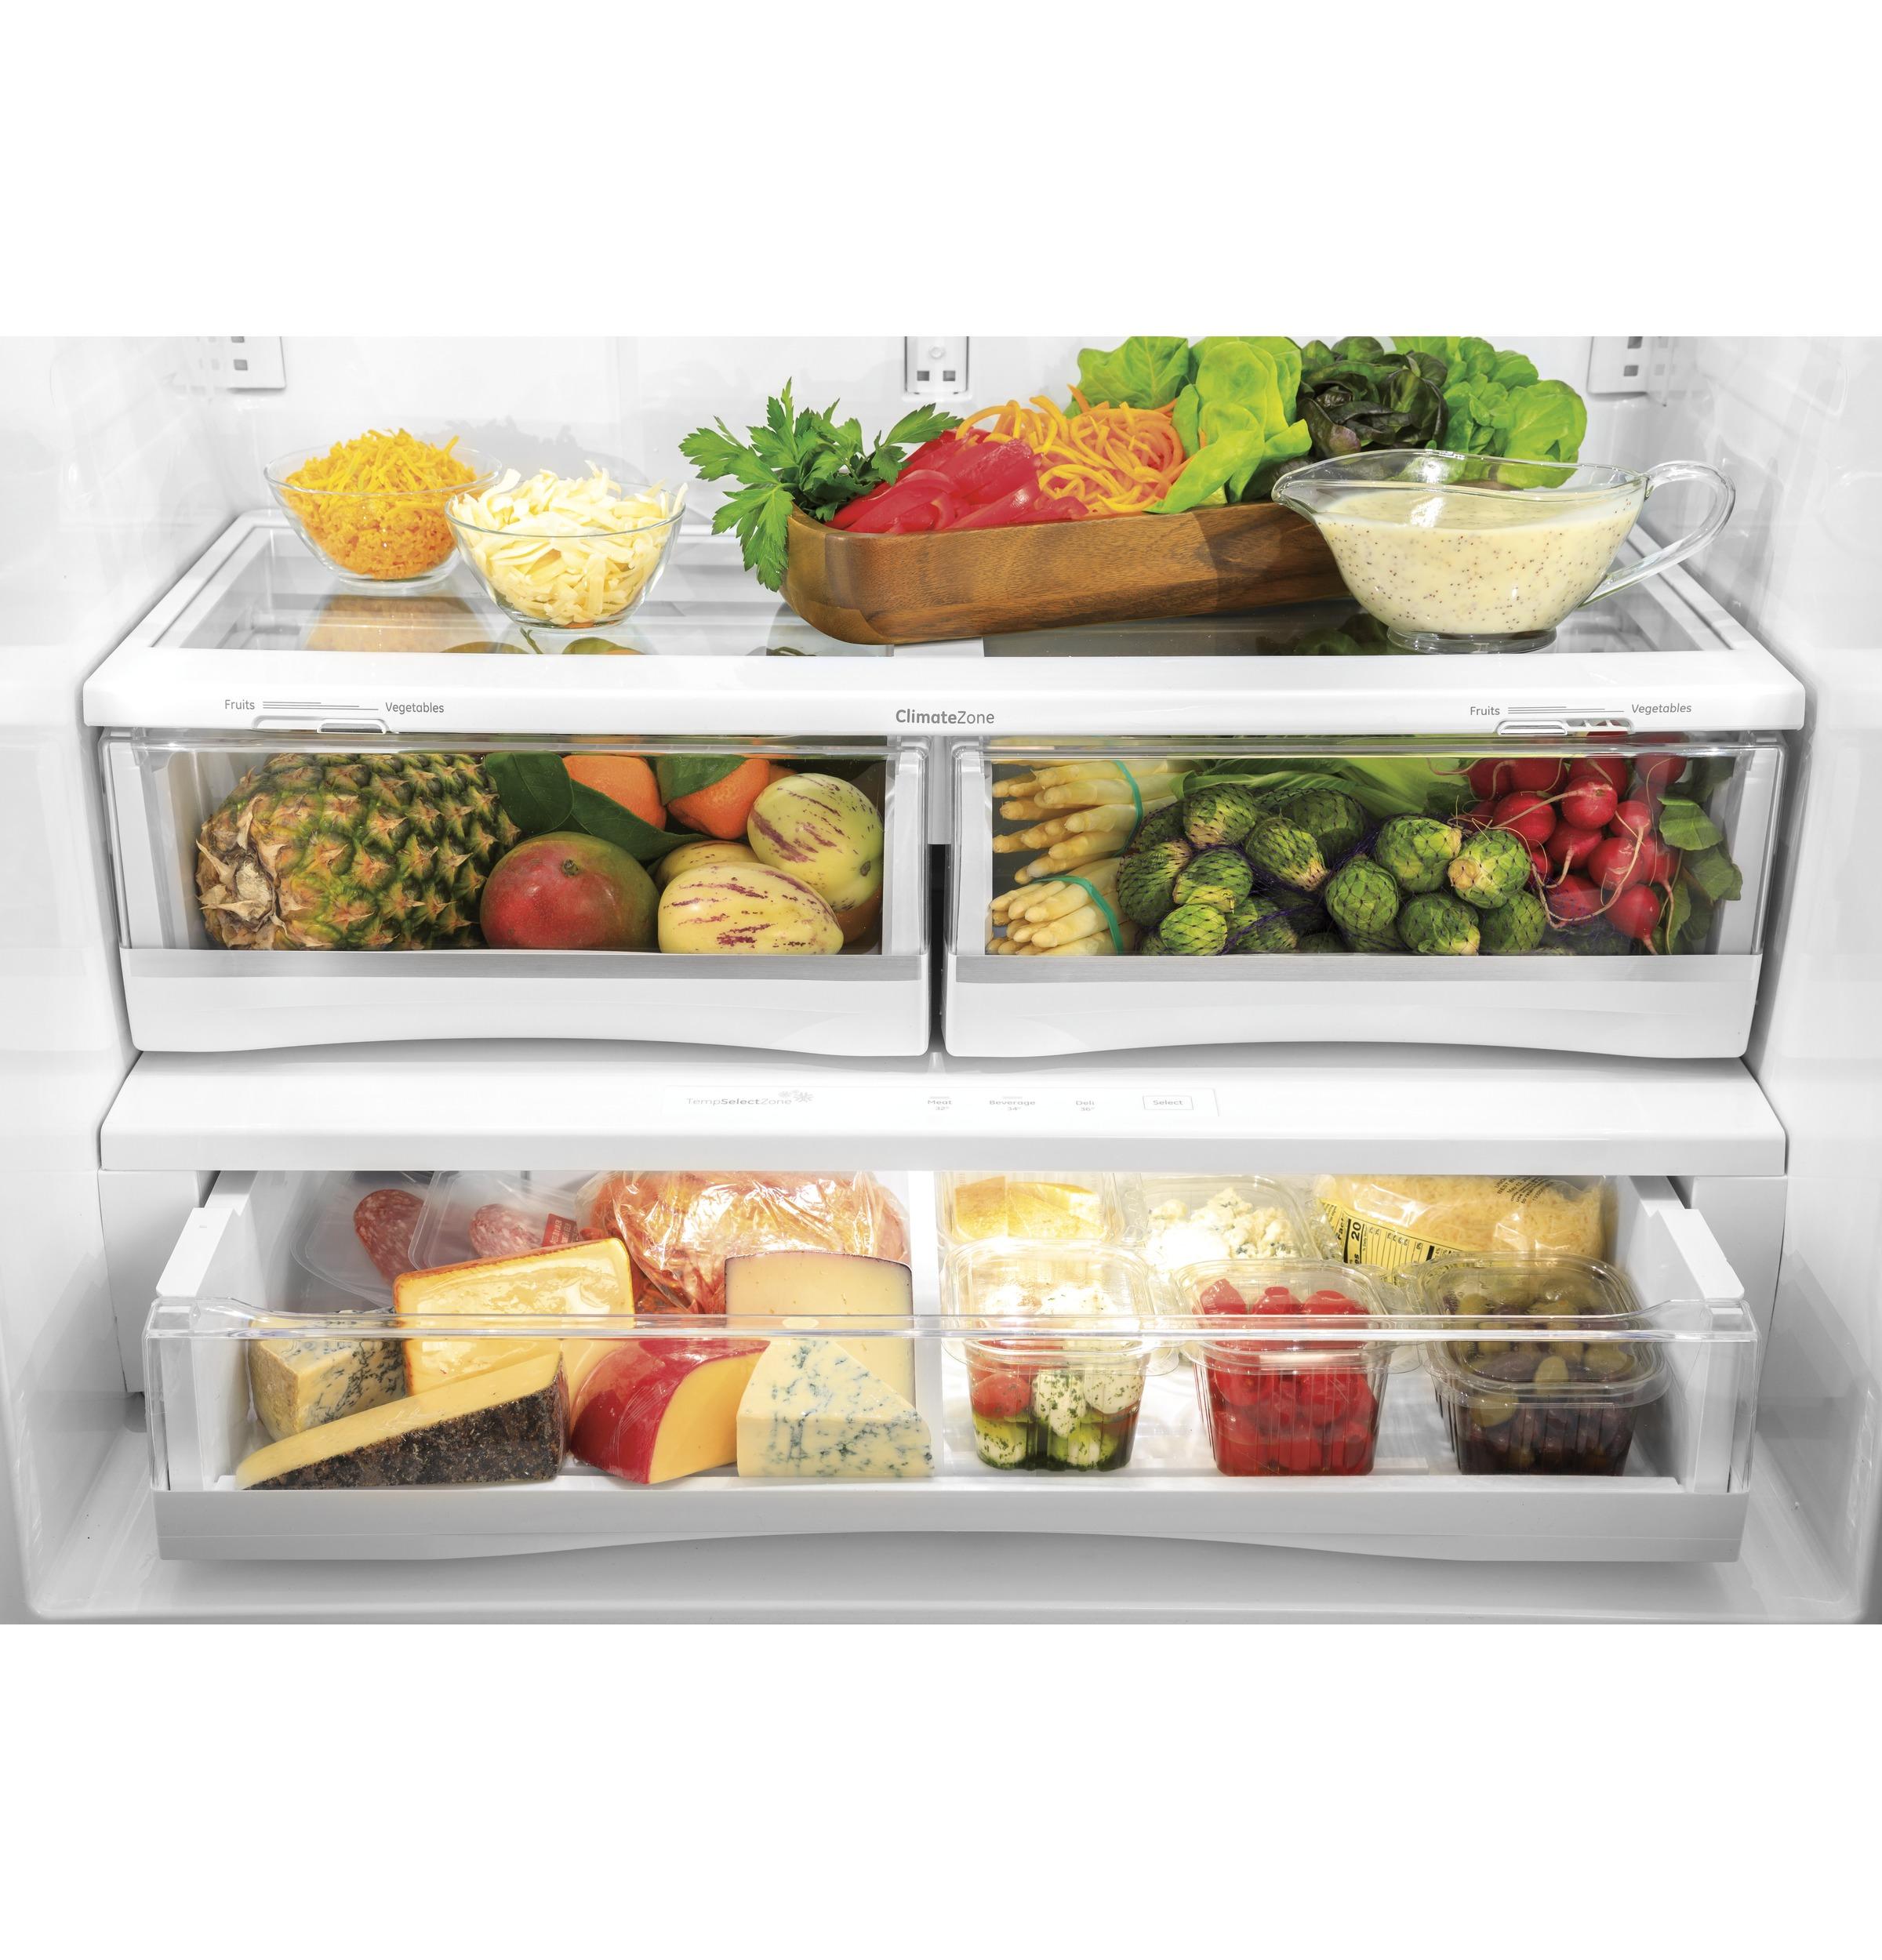 GE Profile™ Series ENERGY STAR® 27.7 Cu. Ft. Fingerprint Resistant French-Door Refrigerator with Hands-Free AutoFill